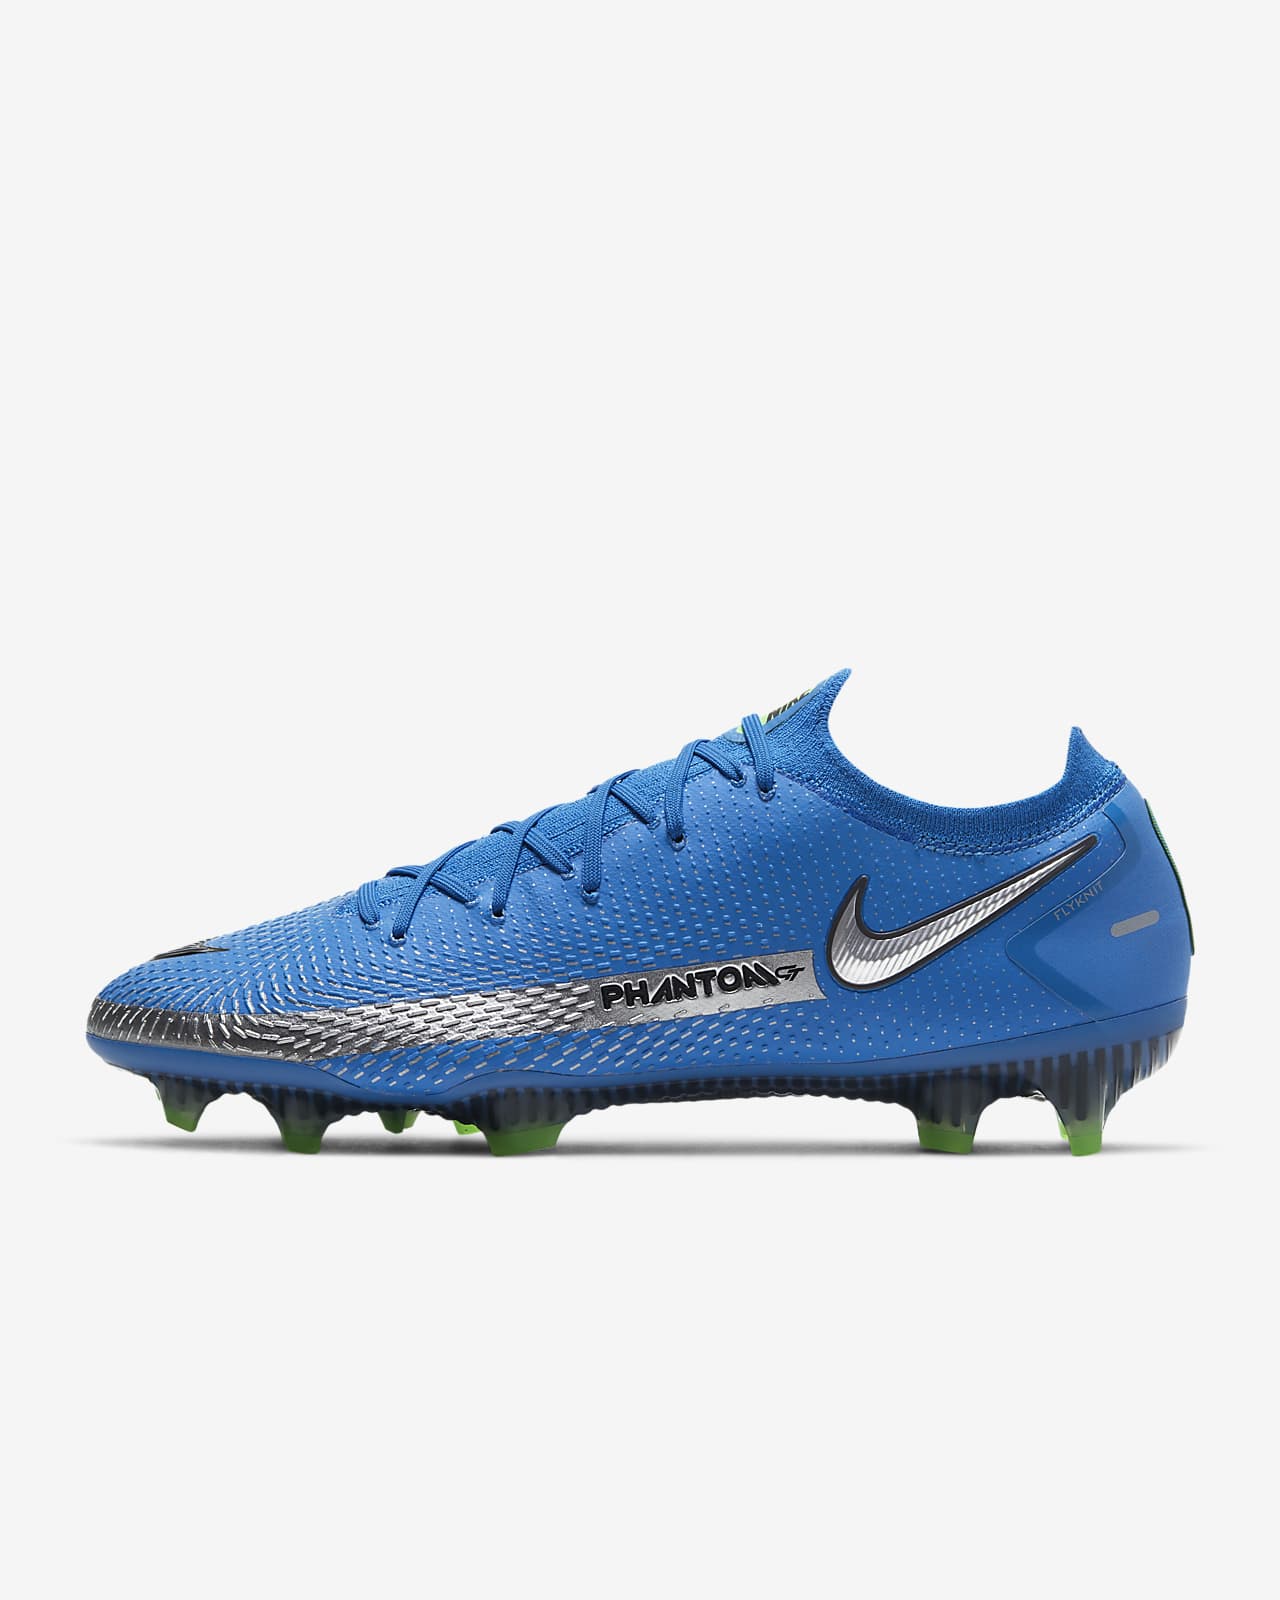 teal nike soccer cleats